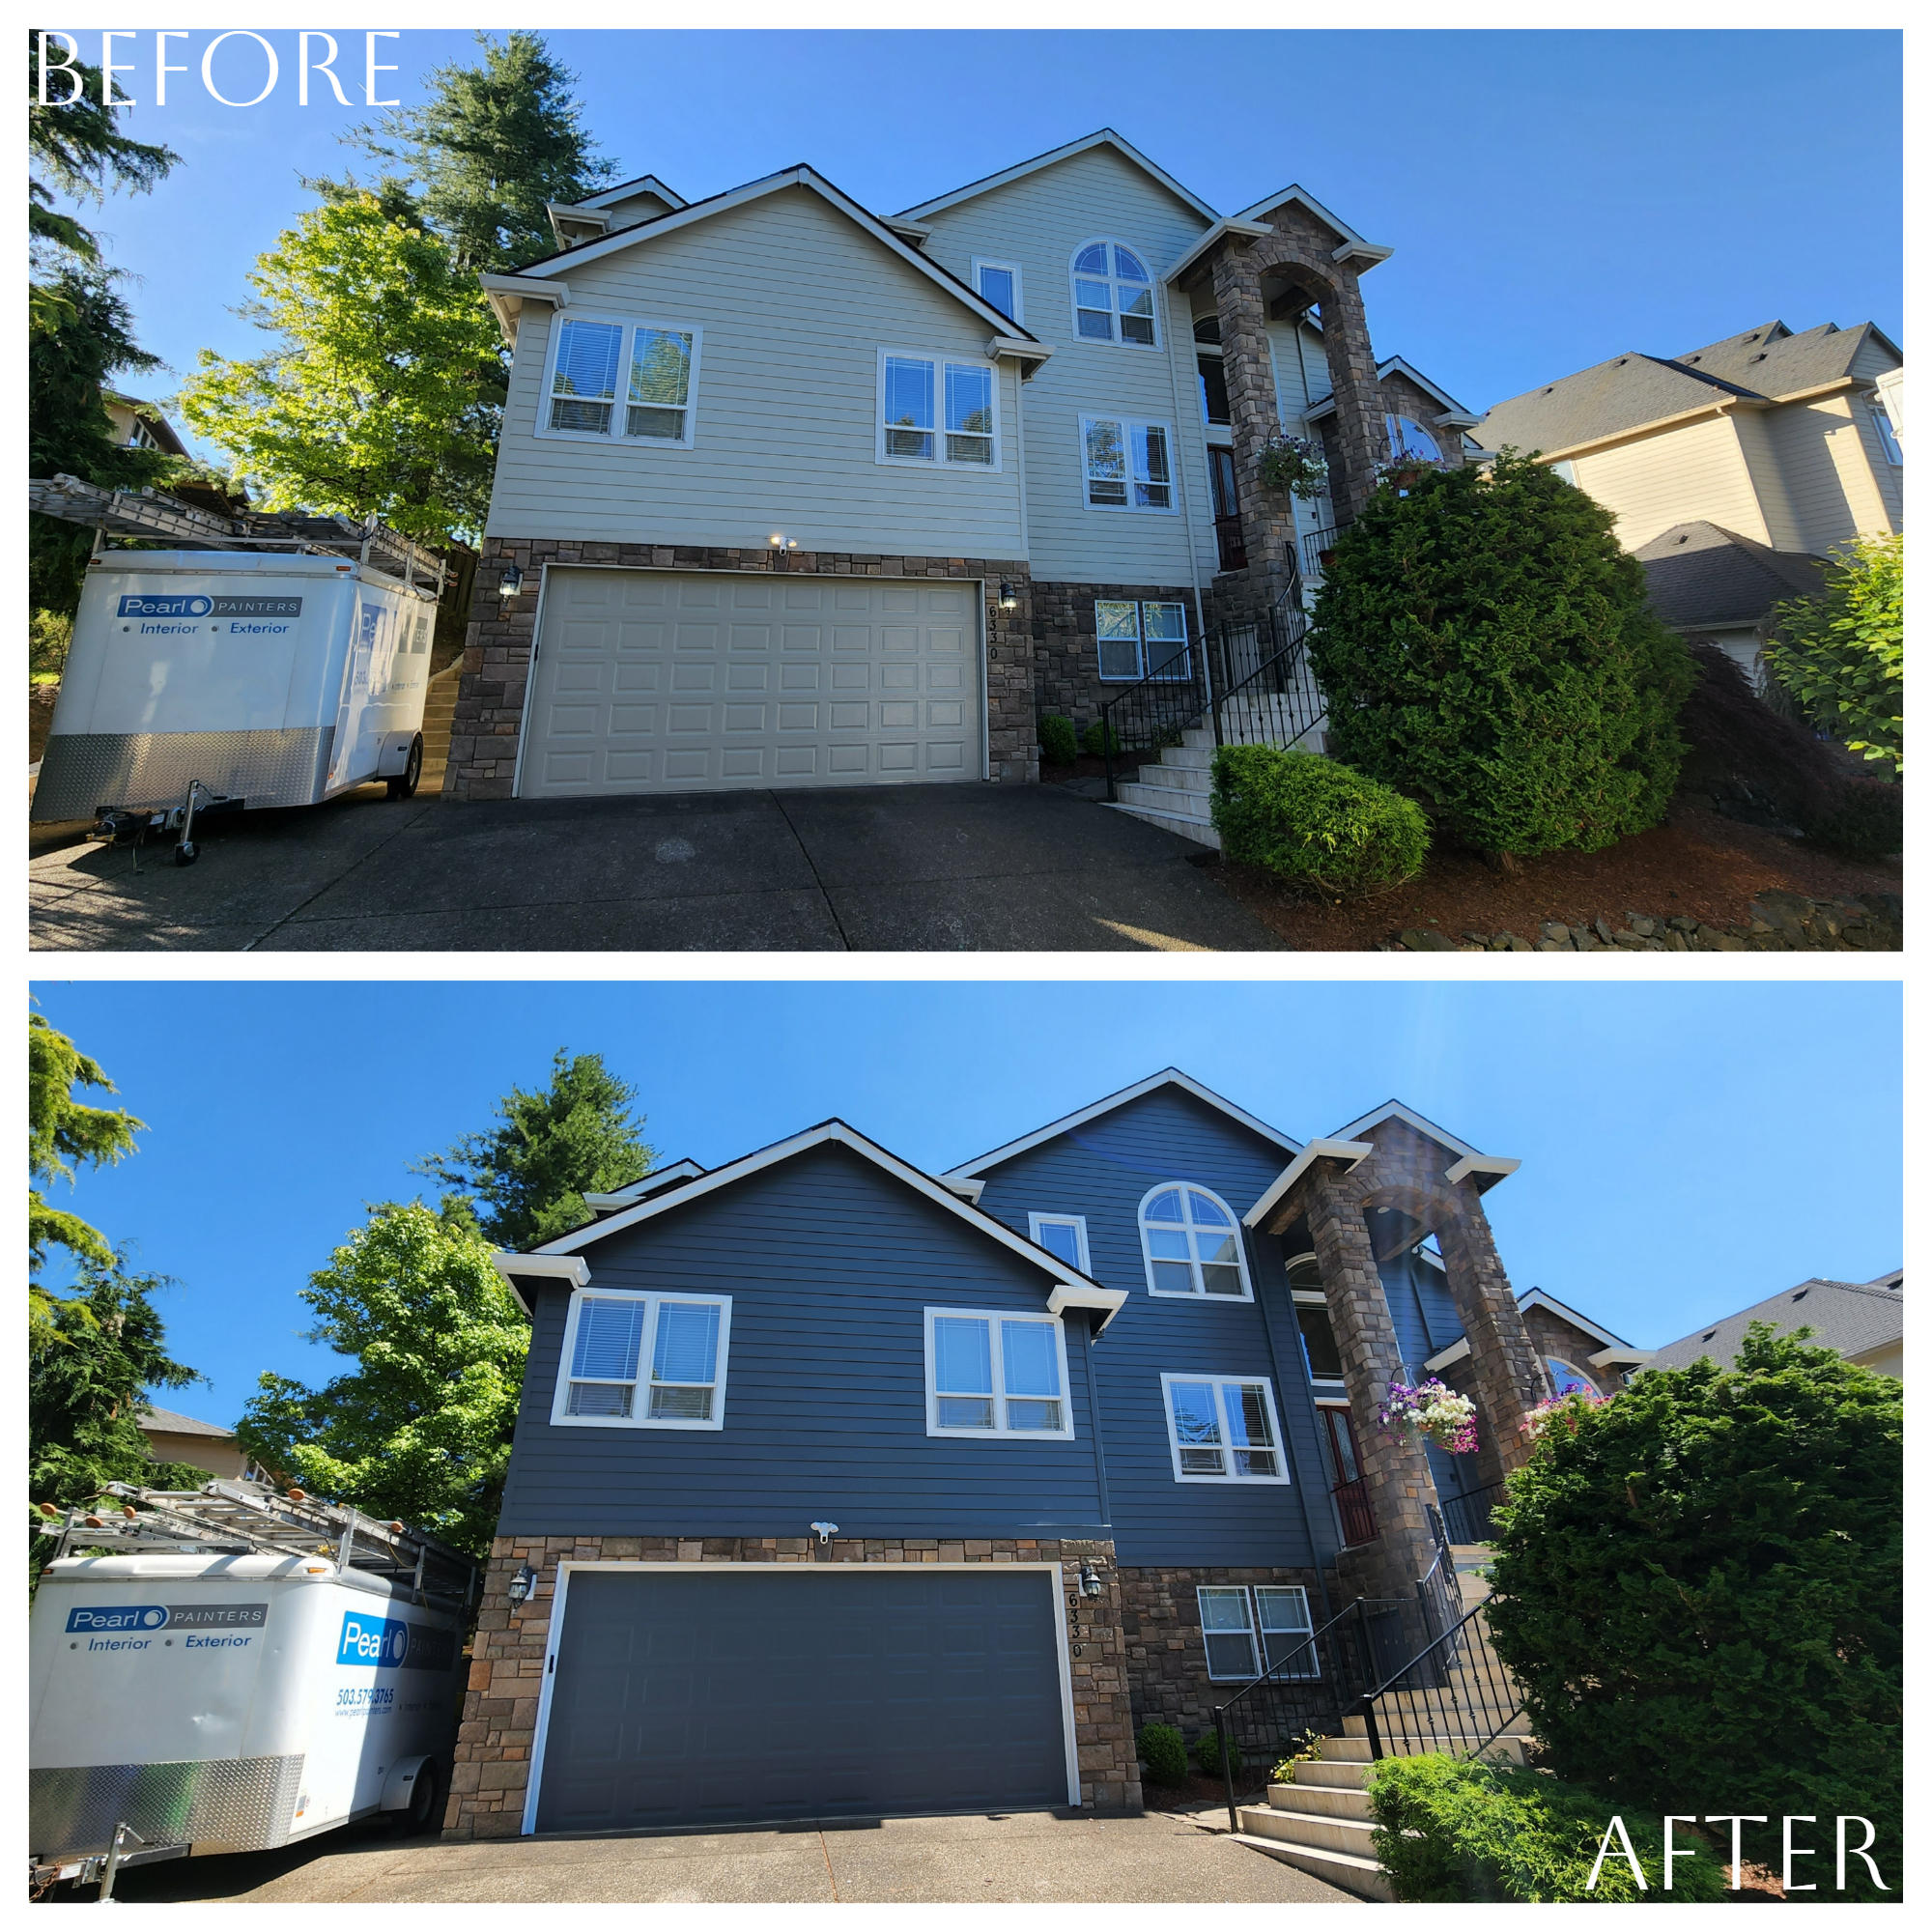 Before and after photos of the exterior of a house painted by Pearl Painters - from white to dark blue